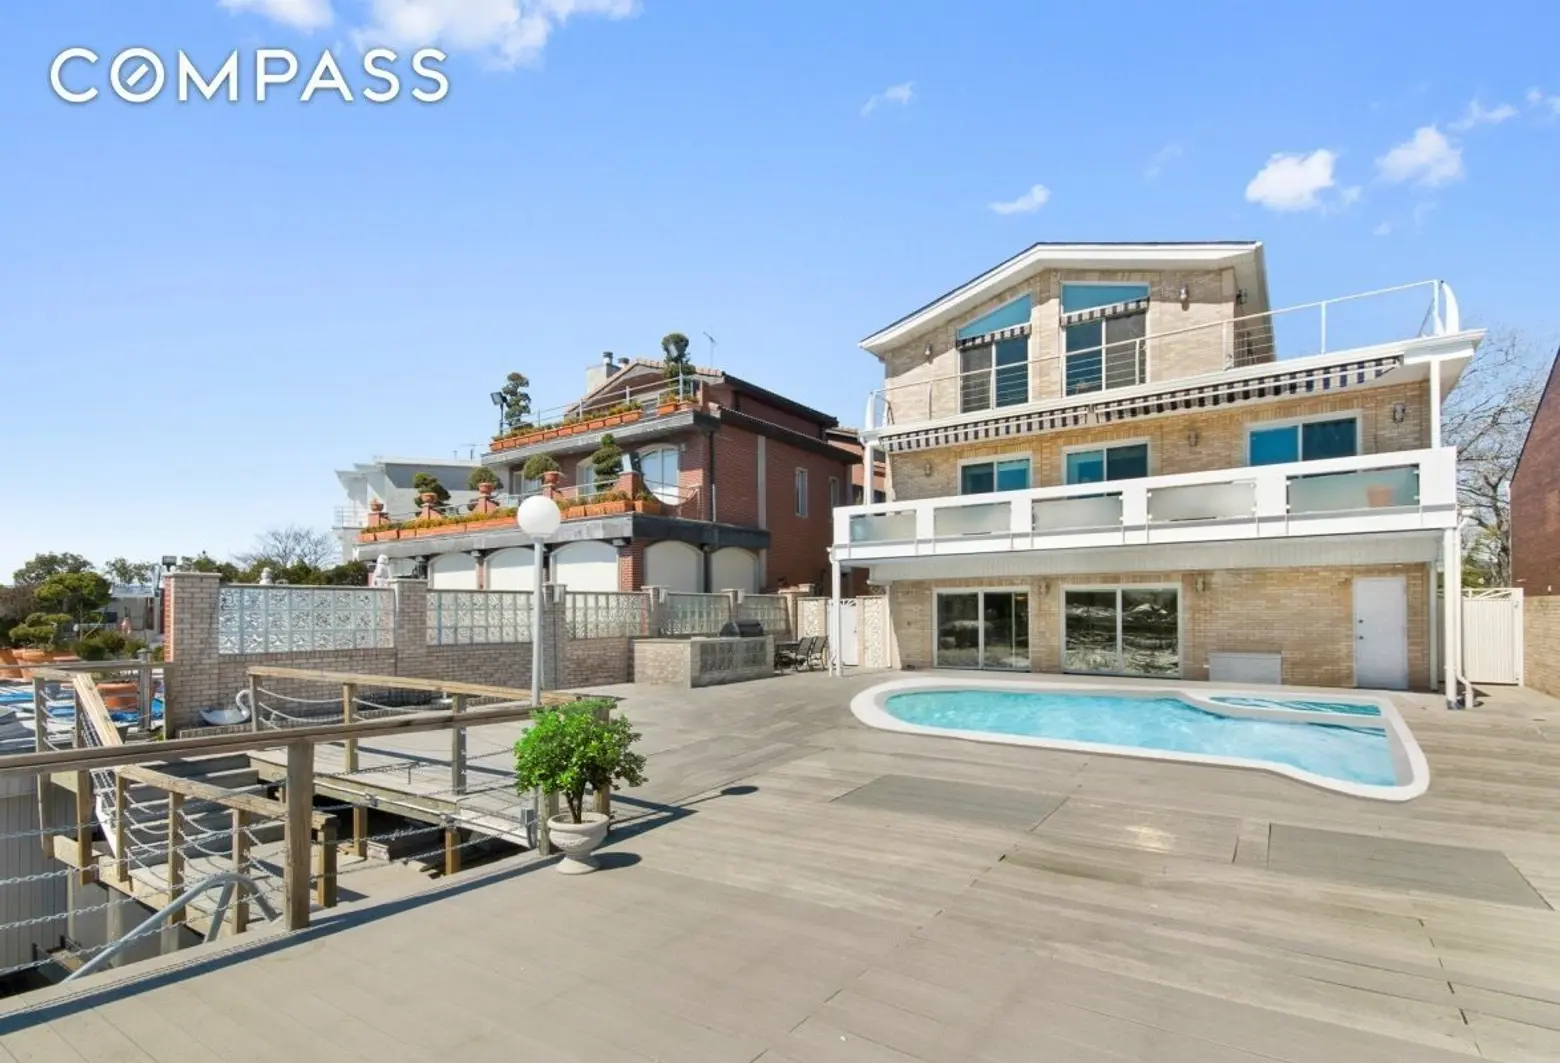 $2.4M waterfront home in Mill Basin has its own pool, dock and jet ski ramp